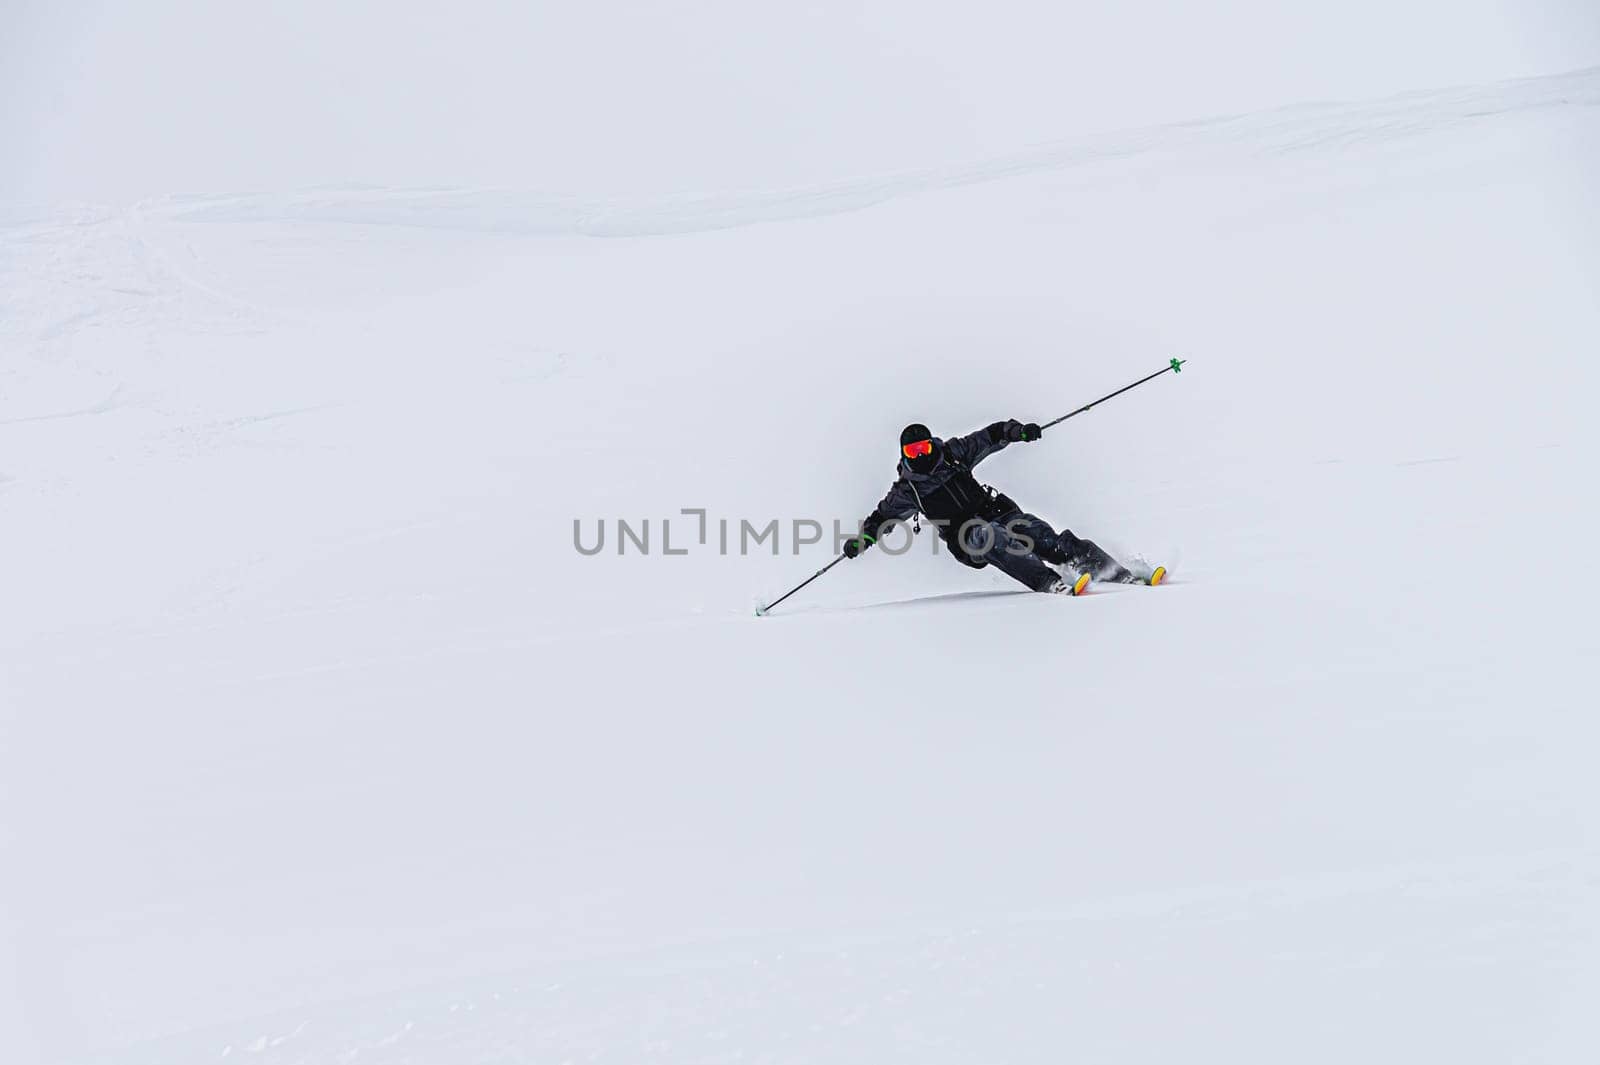 A skier on the piste, going down the slope among the Alpine mountains, which are not visible due to cloudiness.